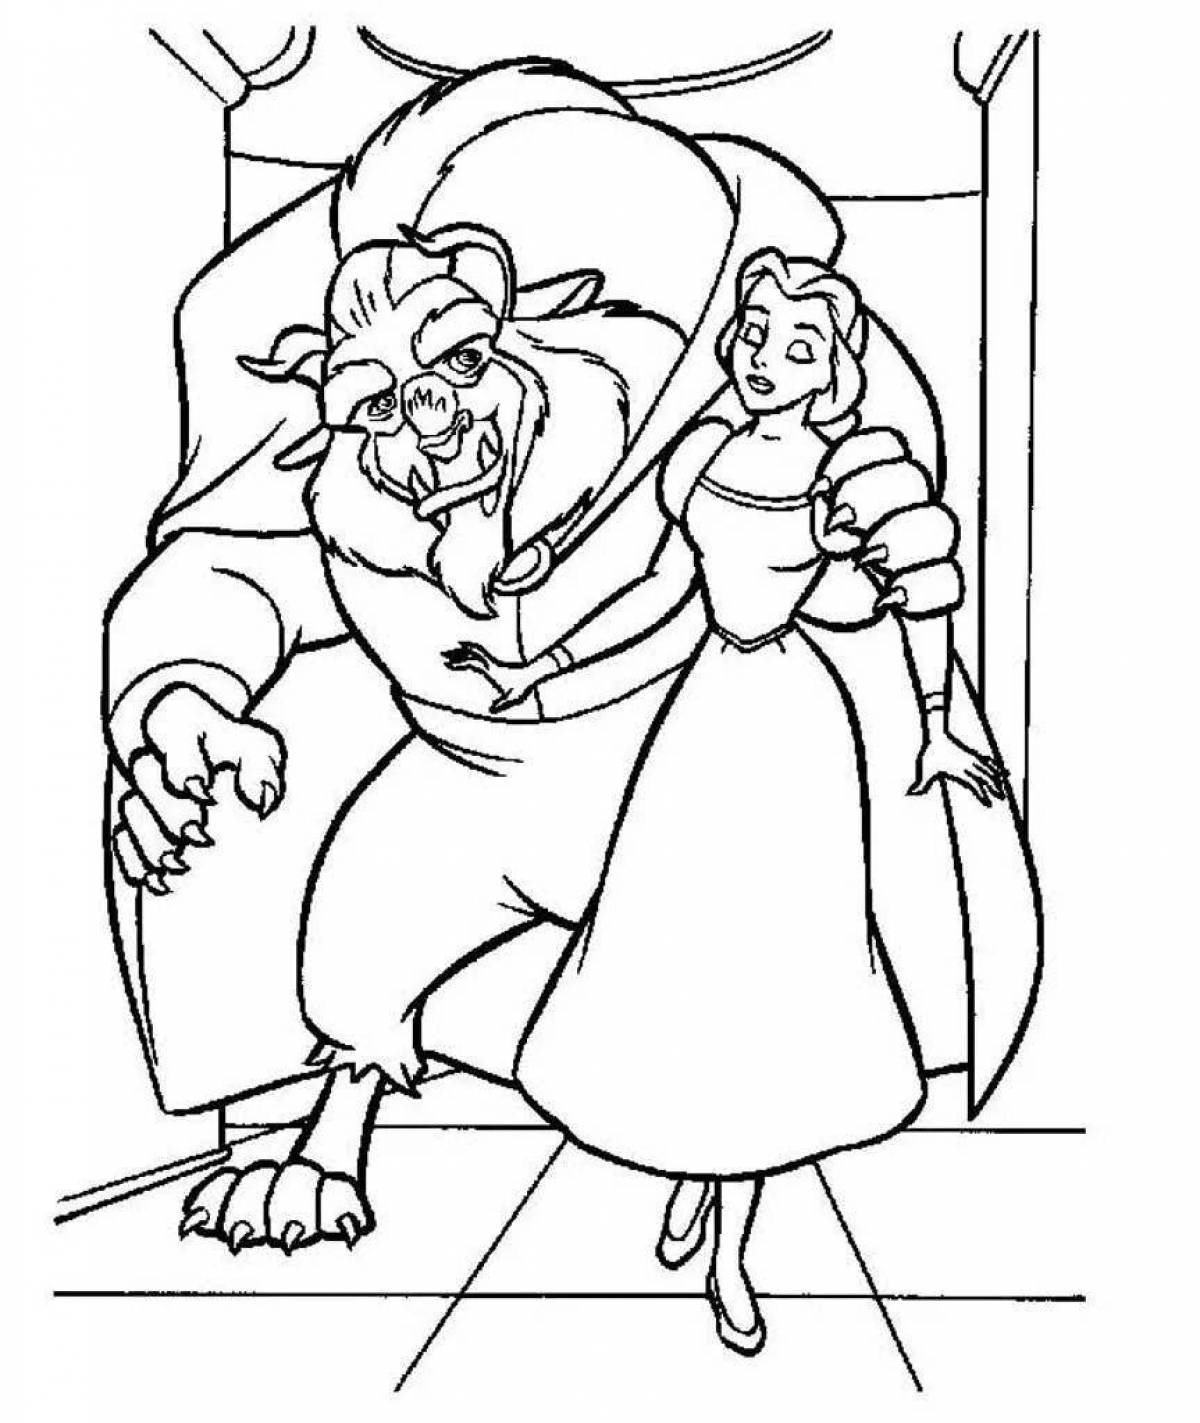 Colorful beauty and the beast coloring pages for kids